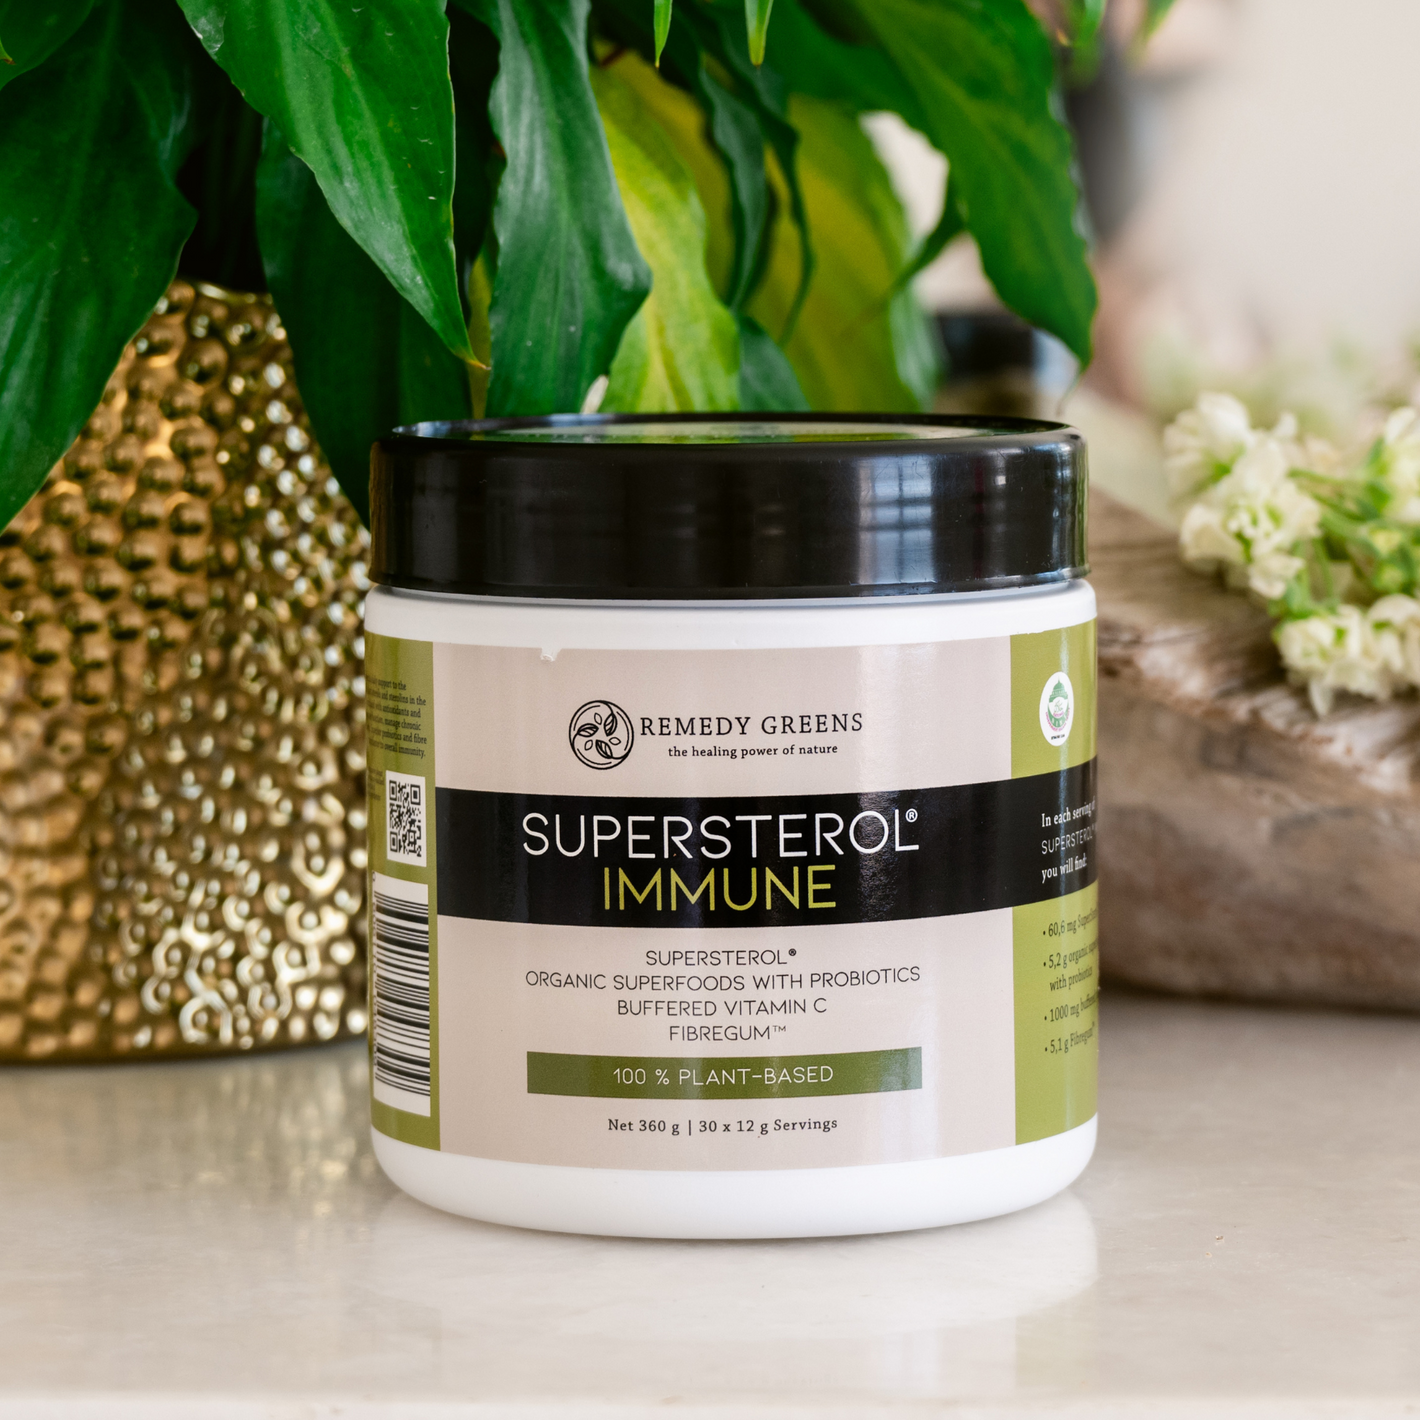 SuperSterol_Immune_Product_In_A_Countertop_Lifestyle_Setting